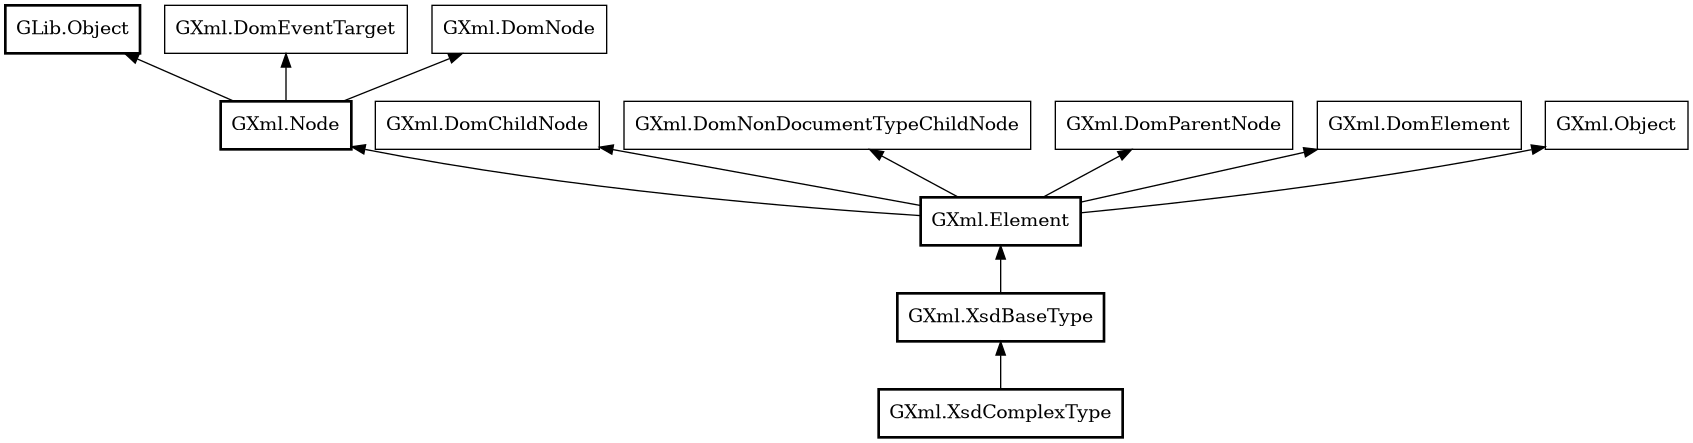 Object hierarchy for XsdComplexType